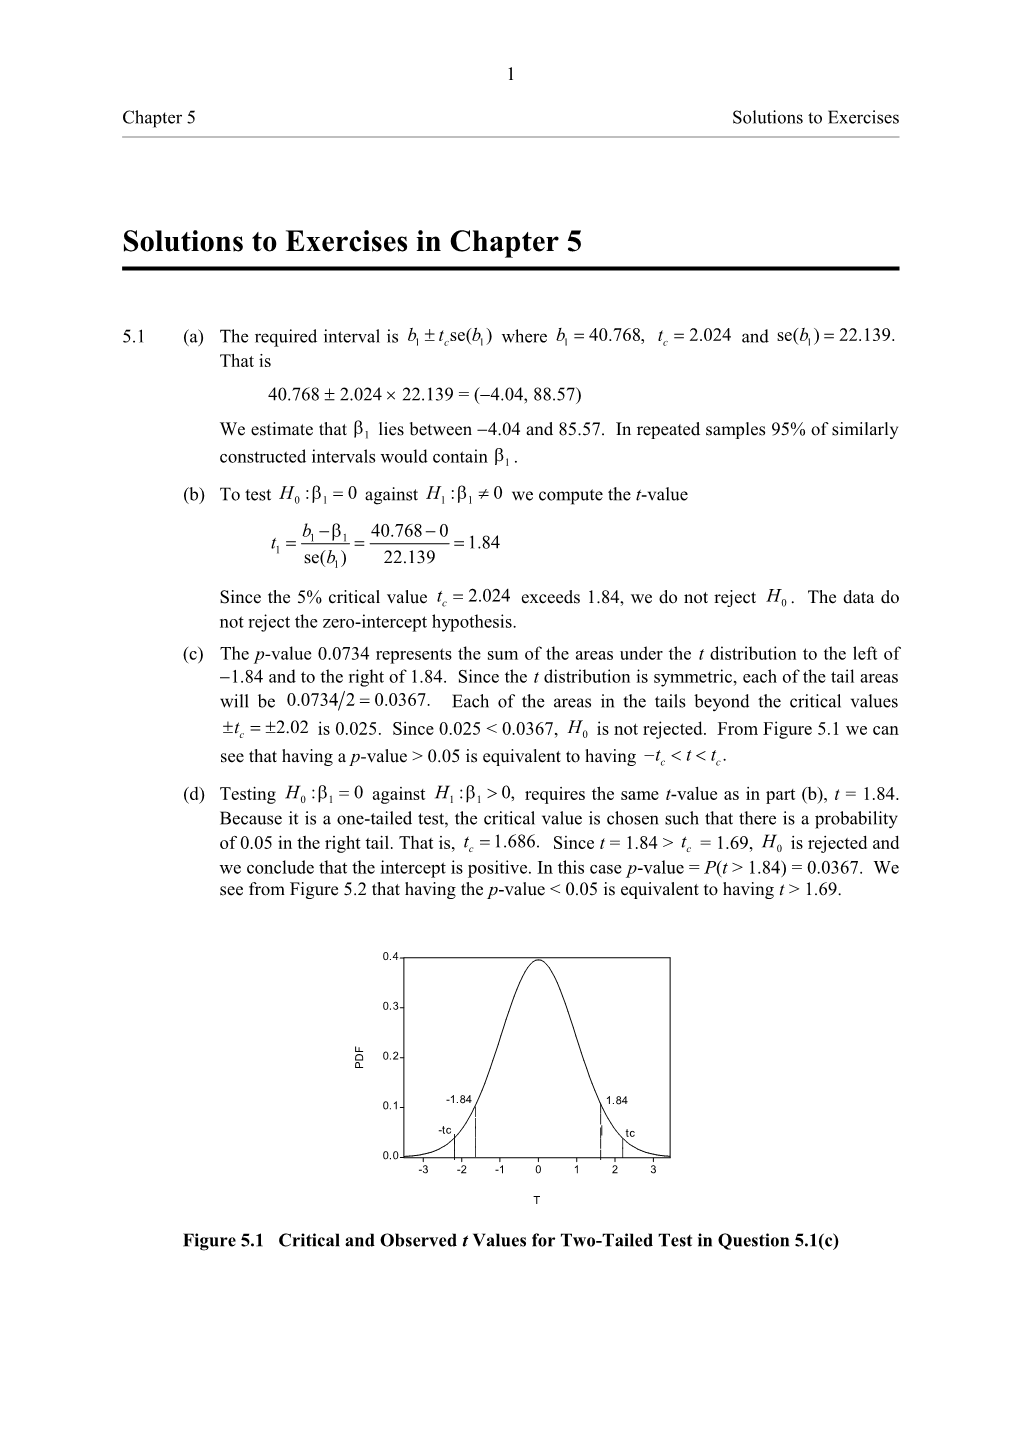 Solutions to Exercises in Chapter 5